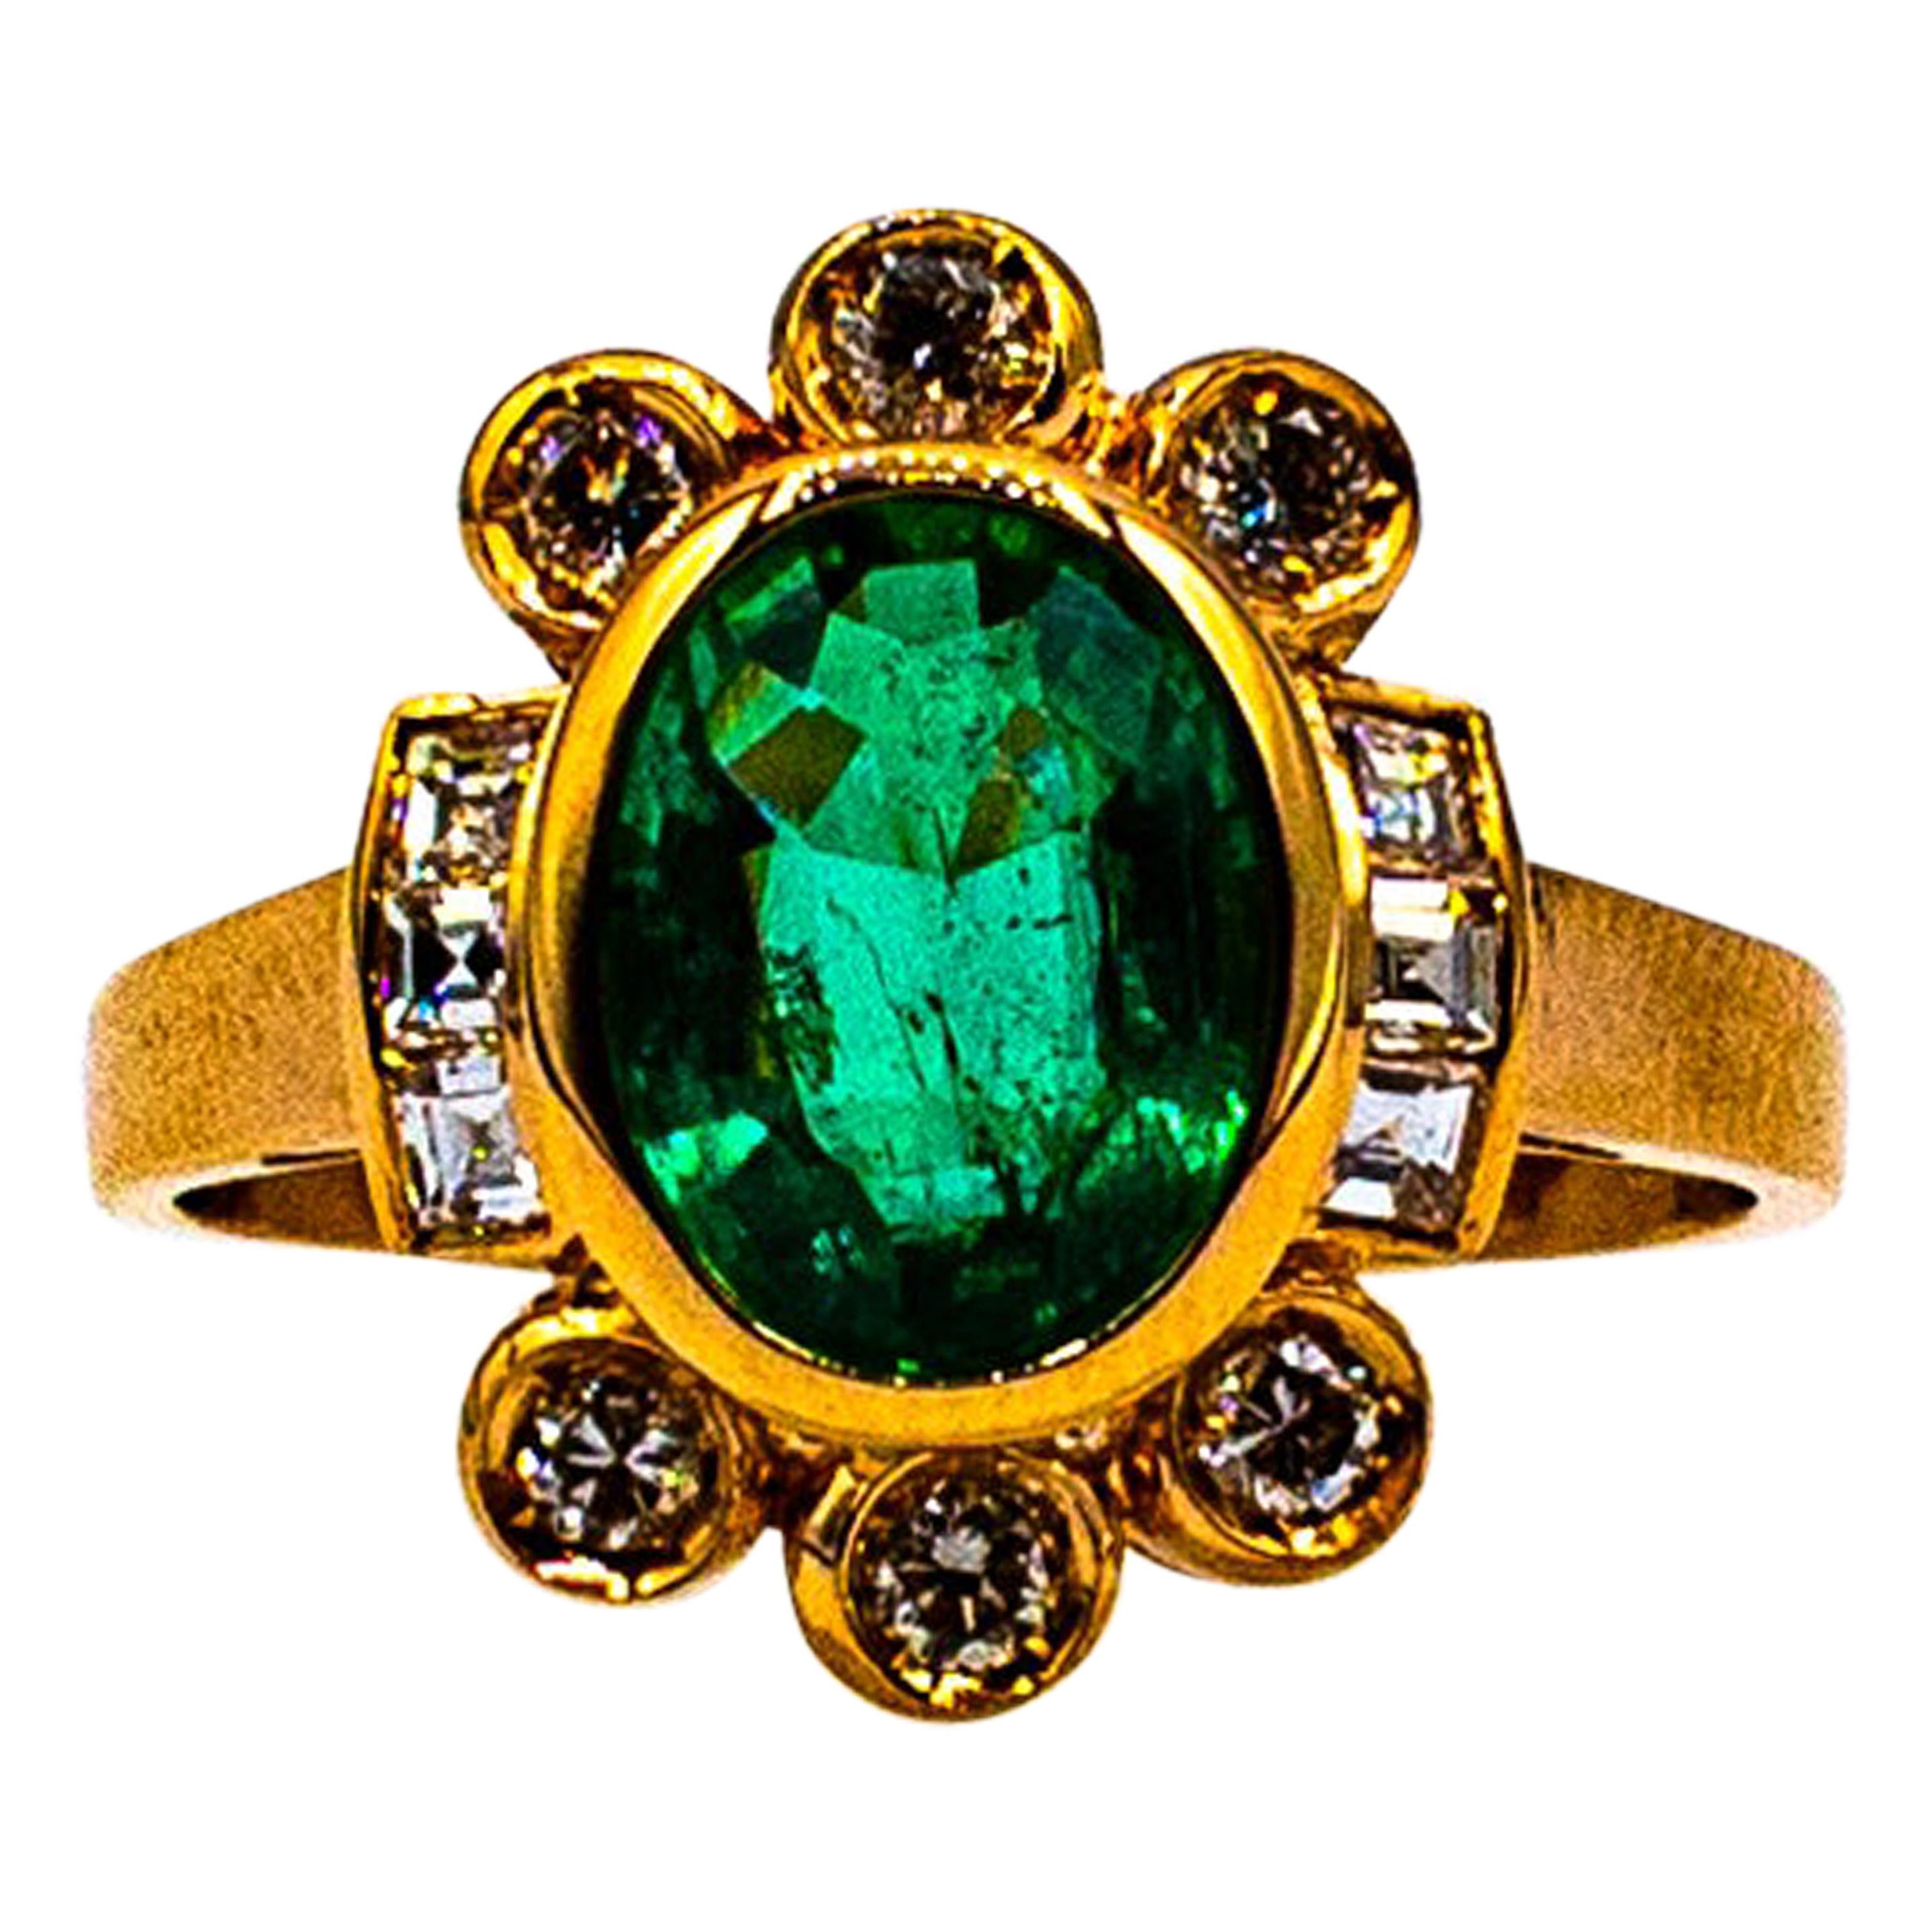 Art Deco Style Oval Cut Emerald White Diamond Yellow Gold Cocktail Ring